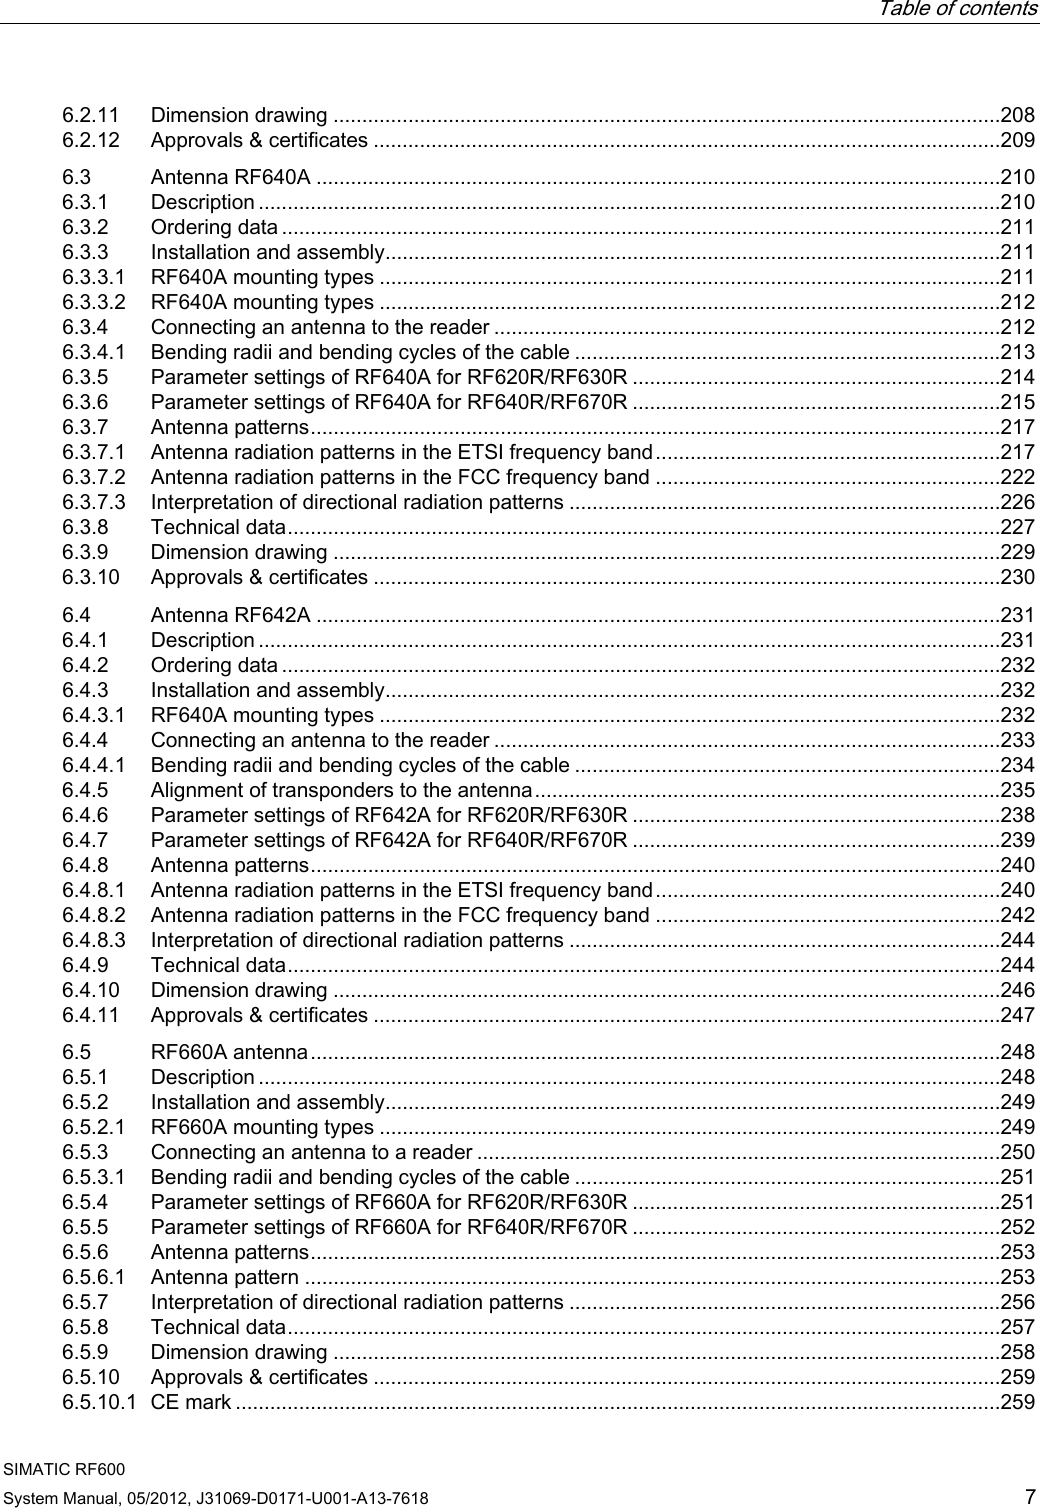   Table of contents   SIMATIC RF600 System Manual, 05/2012, J31069-D0171-U001-A13-7618  7 6.2.11  Dimension drawing ....................................................................................................................208 6.2.12  Approvals &amp; certificates .............................................................................................................209 6.3  Antenna RF640A .......................................................................................................................210 6.3.1  Description .................................................................................................................................210 6.3.2  Ordering data .............................................................................................................................211 6.3.3  Installation and assembly...........................................................................................................211 6.3.3.1  RF640A mounting types ............................................................................................................211 6.3.3.2  RF640A mounting types ............................................................................................................212 6.3.4  Connecting an antenna to the reader ........................................................................................212 6.3.4.1  Bending radii and bending cycles of the cable ..........................................................................213 6.3.5  Parameter settings of RF640A for RF620R/RF630R ................................................................214 6.3.6  Parameter settings of RF640A for RF640R/RF670R ................................................................215 6.3.7  Antenna patterns........................................................................................................................217 6.3.7.1  Antenna radiation patterns in the ETSI frequency band............................................................217 6.3.7.2  Antenna radiation patterns in the FCC frequency band ............................................................222 6.3.7.3  Interpretation of directional radiation patterns ...........................................................................226 6.3.8  Technical data............................................................................................................................227 6.3.9  Dimension drawing ....................................................................................................................229 6.3.10  Approvals &amp; certificates .............................................................................................................230 6.4  Antenna RF642A .......................................................................................................................231 6.4.1  Description .................................................................................................................................231 6.4.2  Ordering data .............................................................................................................................232 6.4.3  Installation and assembly...........................................................................................................232 6.4.3.1  RF640A mounting types ............................................................................................................232 6.4.4  Connecting an antenna to the reader ........................................................................................233 6.4.4.1  Bending radii and bending cycles of the cable ..........................................................................234 6.4.5  Alignment of transponders to the antenna.................................................................................235 6.4.6  Parameter settings of RF642A for RF620R/RF630R ................................................................238 6.4.7  Parameter settings of RF642A for RF640R/RF670R ................................................................239 6.4.8  Antenna patterns........................................................................................................................240 6.4.8.1  Antenna radiation patterns in the ETSI frequency band............................................................240 6.4.8.2  Antenna radiation patterns in the FCC frequency band ............................................................242 6.4.8.3  Interpretation of directional radiation patterns ...........................................................................244 6.4.9  Technical data............................................................................................................................244 6.4.10  Dimension drawing ....................................................................................................................246 6.4.11  Approvals &amp; certificates .............................................................................................................247 6.5  RF660A antenna........................................................................................................................248 6.5.1  Description .................................................................................................................................248 6.5.2  Installation and assembly...........................................................................................................249 6.5.2.1  RF660A mounting types ............................................................................................................249 6.5.3  Connecting an antenna to a reader ...........................................................................................250 6.5.3.1  Bending radii and bending cycles of the cable ..........................................................................251 6.5.4  Parameter settings of RF660A for RF620R/RF630R ................................................................251 6.5.5  Parameter settings of RF660A for RF640R/RF670R ................................................................252 6.5.6  Antenna patterns........................................................................................................................253 6.5.6.1  Antenna pattern .........................................................................................................................253 6.5.7  Interpretation of directional radiation patterns ...........................................................................256 6.5.8  Technical data............................................................................................................................257 6.5.9  Dimension drawing ....................................................................................................................258 6.5.10  Approvals &amp; certificates .............................................................................................................259 6.5.10.1  CE mark .....................................................................................................................................259 